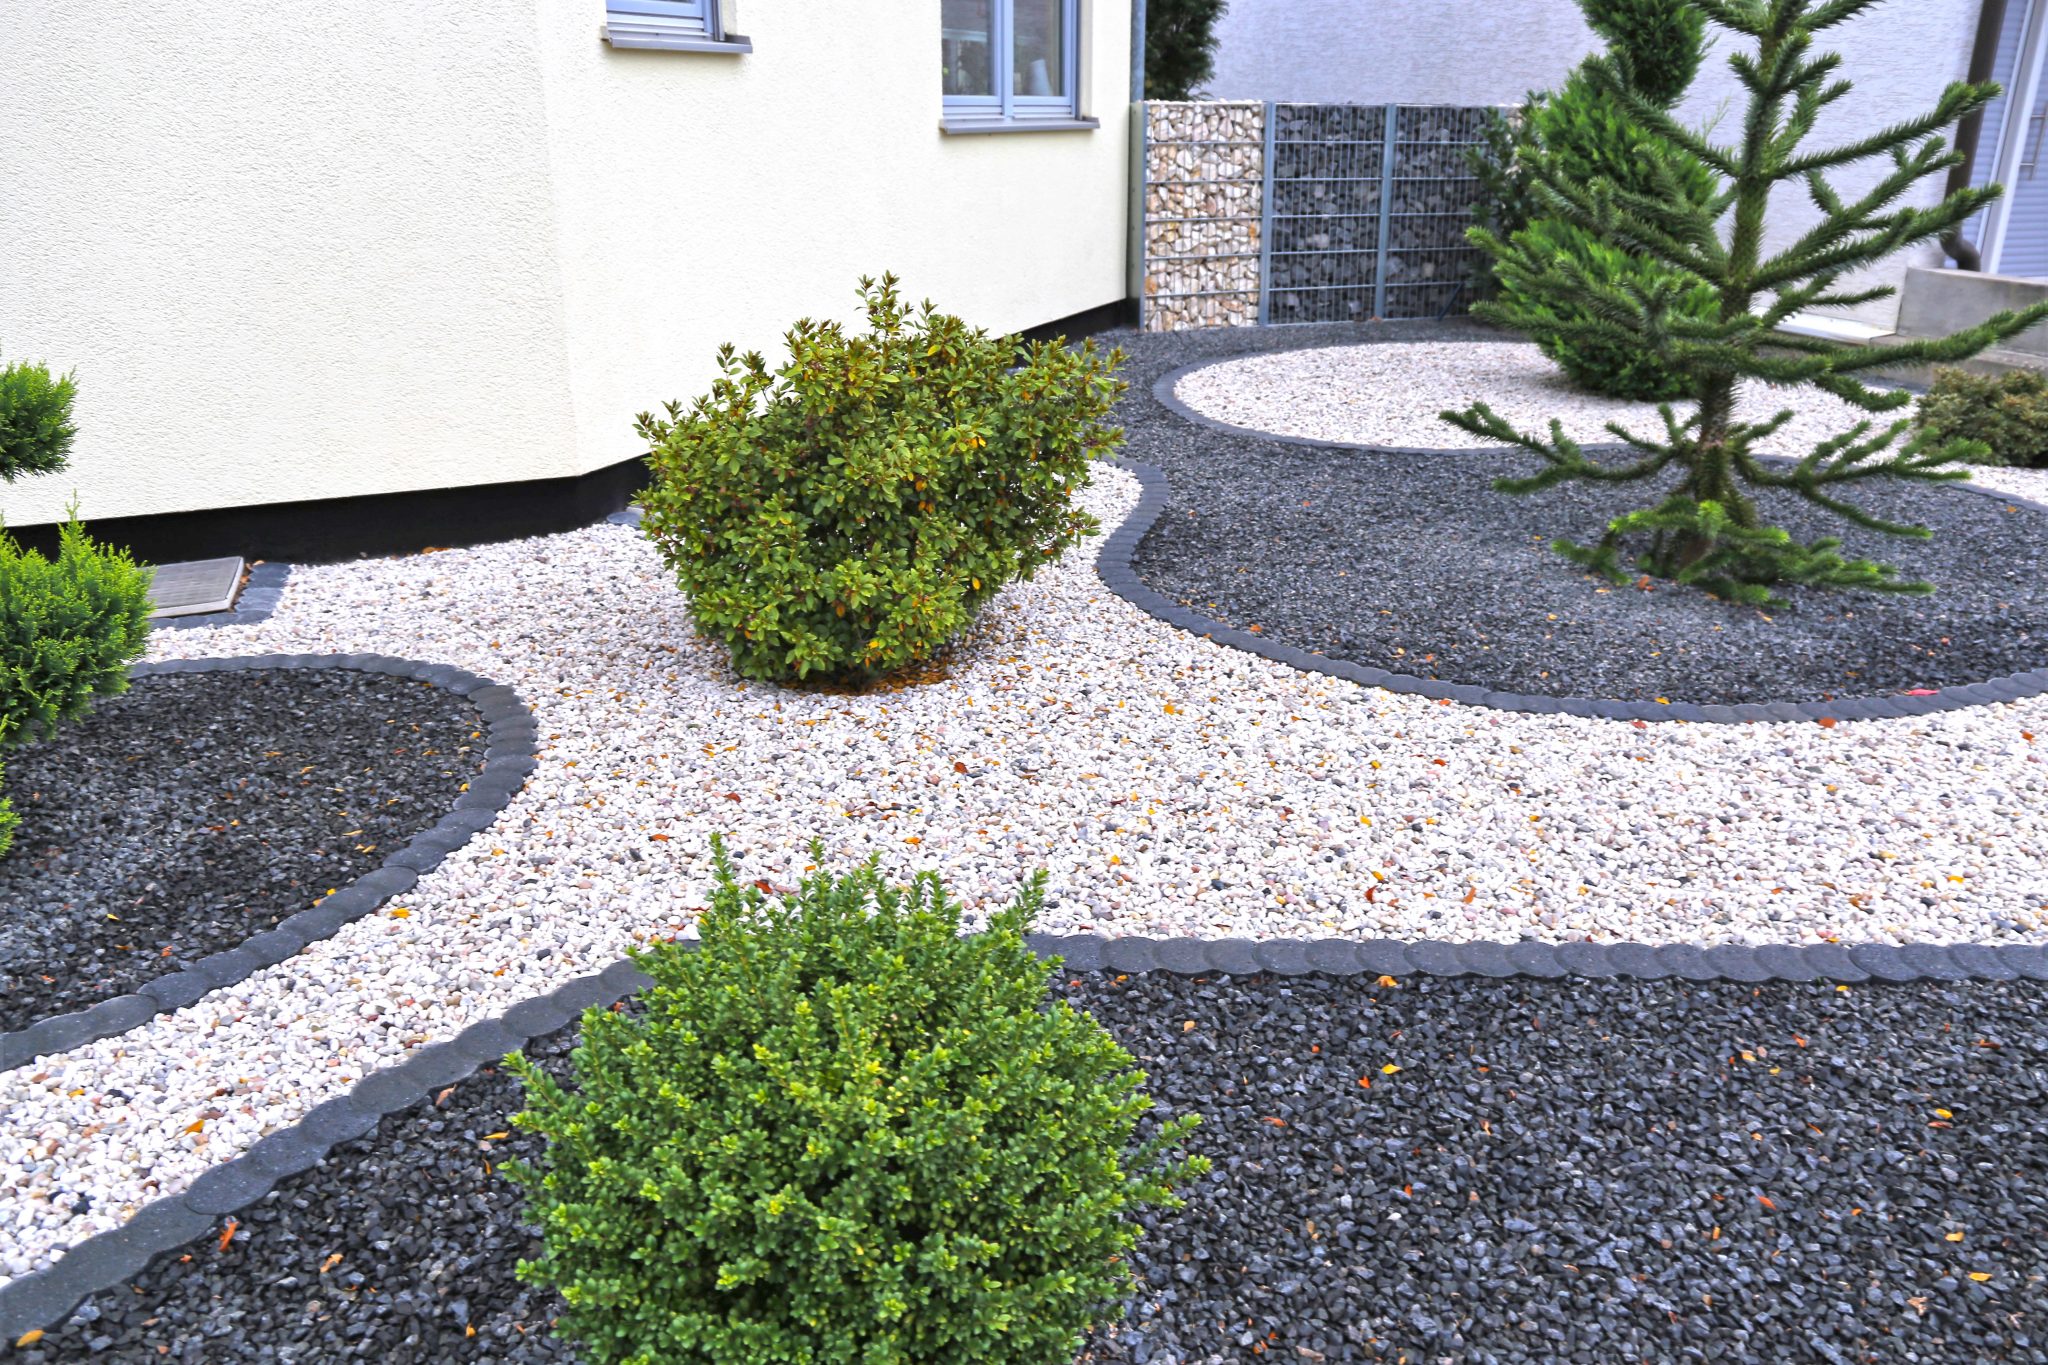 Landscaping with Decorative Rock & Gravel - Ornamental Stone